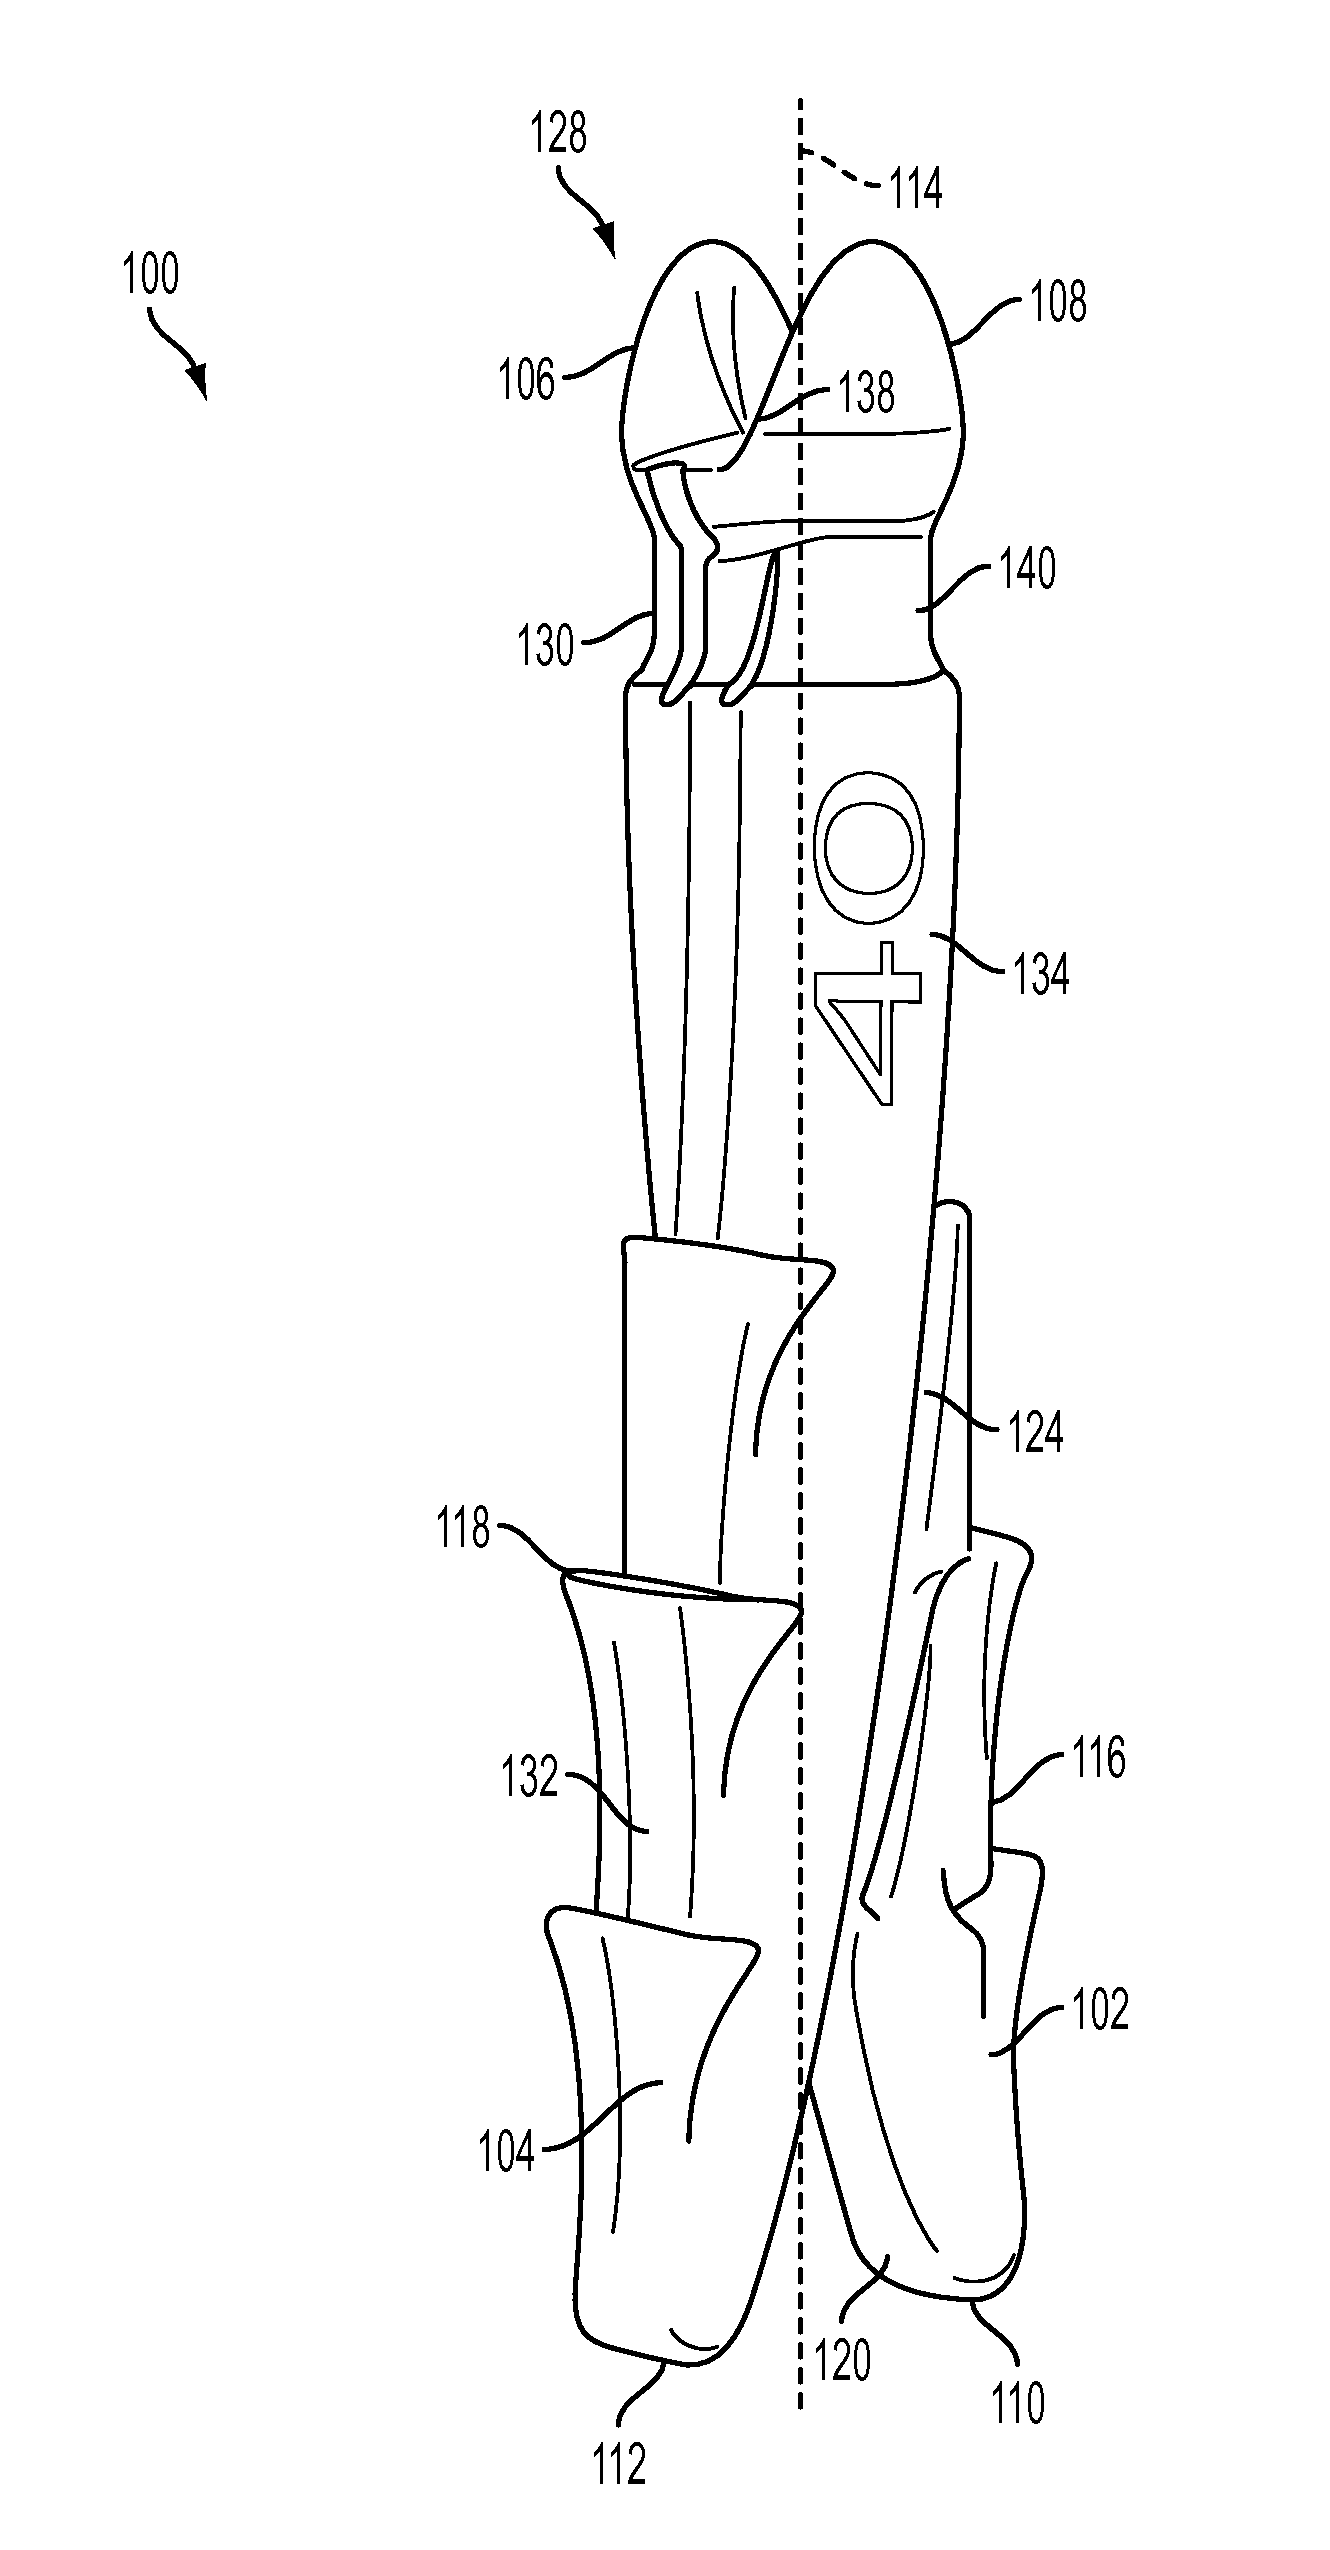 Revisable orthopedic anchor and methods of use